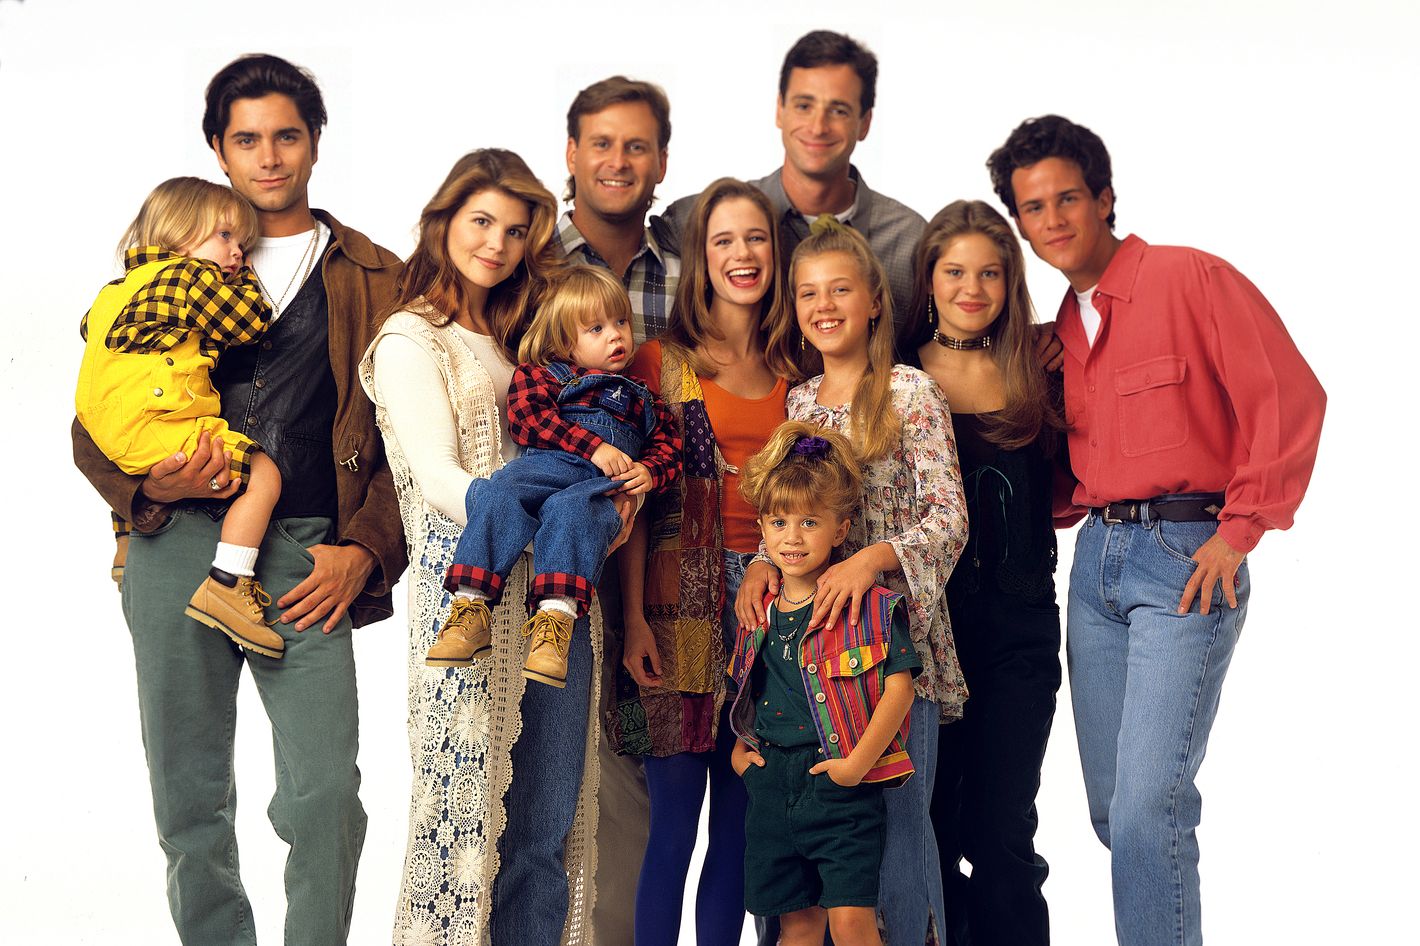 Full House to Get a New Season on Netflix - IGN